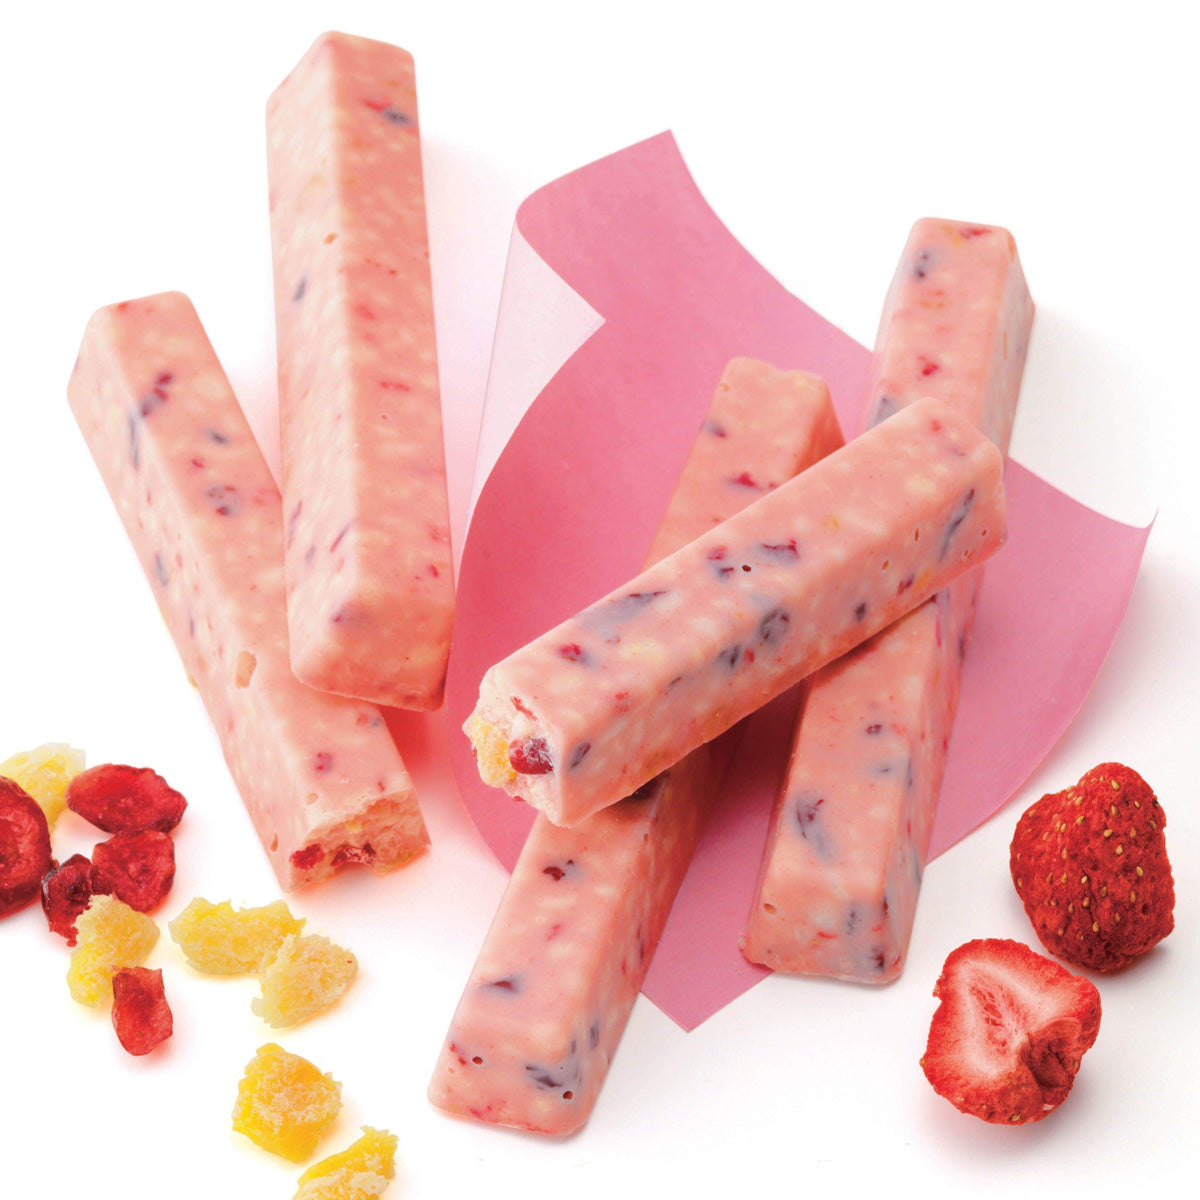 ROYCE' Chocolate - Fruit Bar Chocolate - Image shows pink chocolate bars on a pink plate with fruits such as red berries and yellow fruit chunks. Background is in white and features a pink paper.